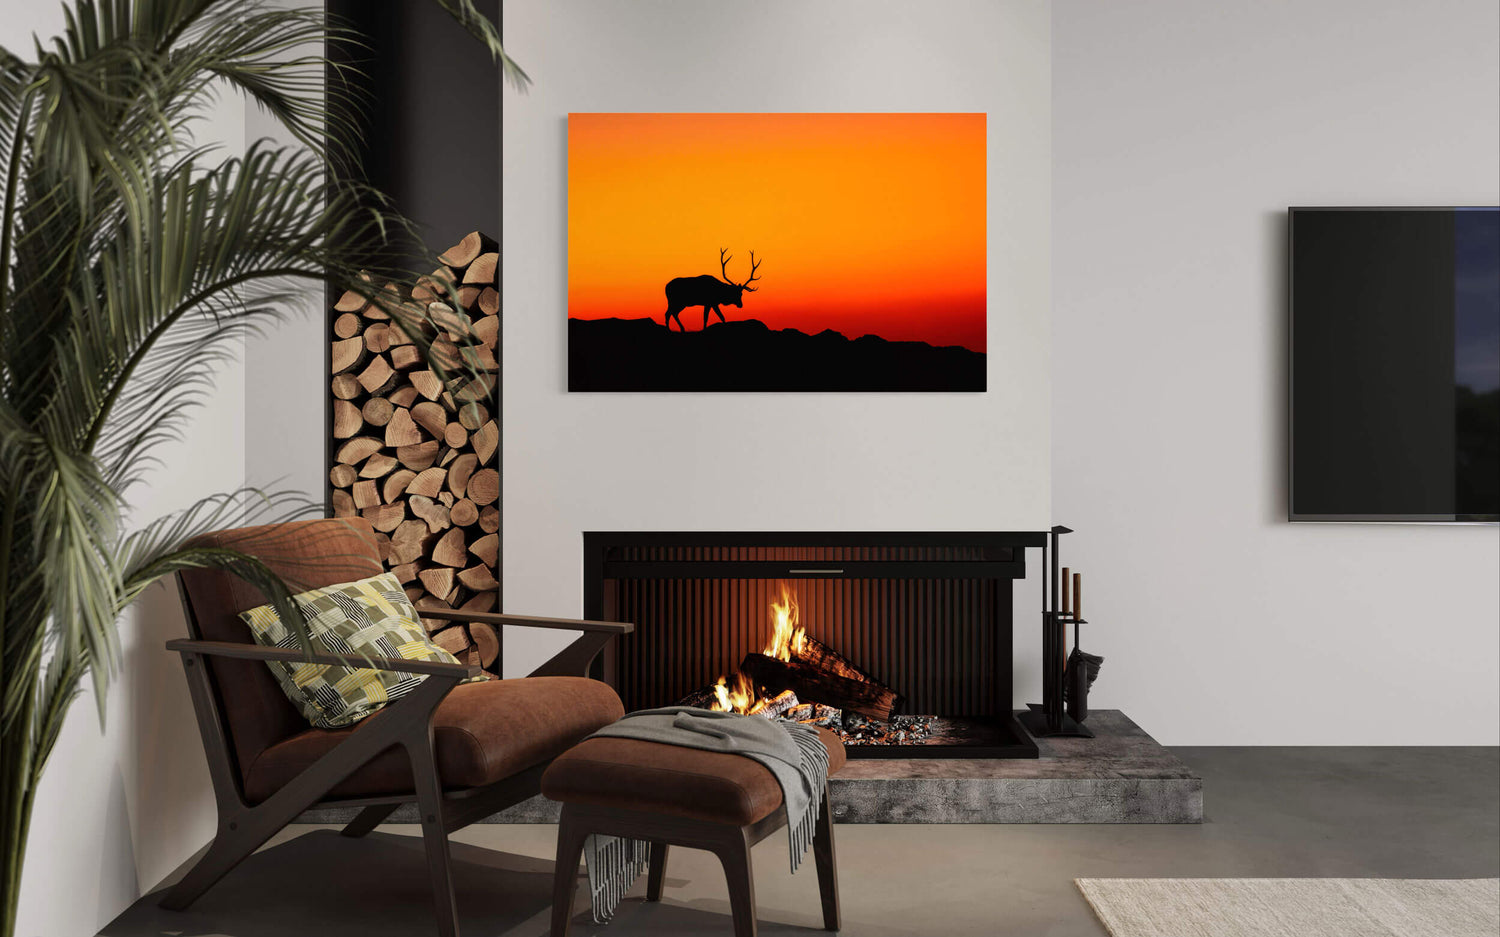 An elk picture from Trail Ridge Road in Rocky Mountain National Park hangs in a living room.